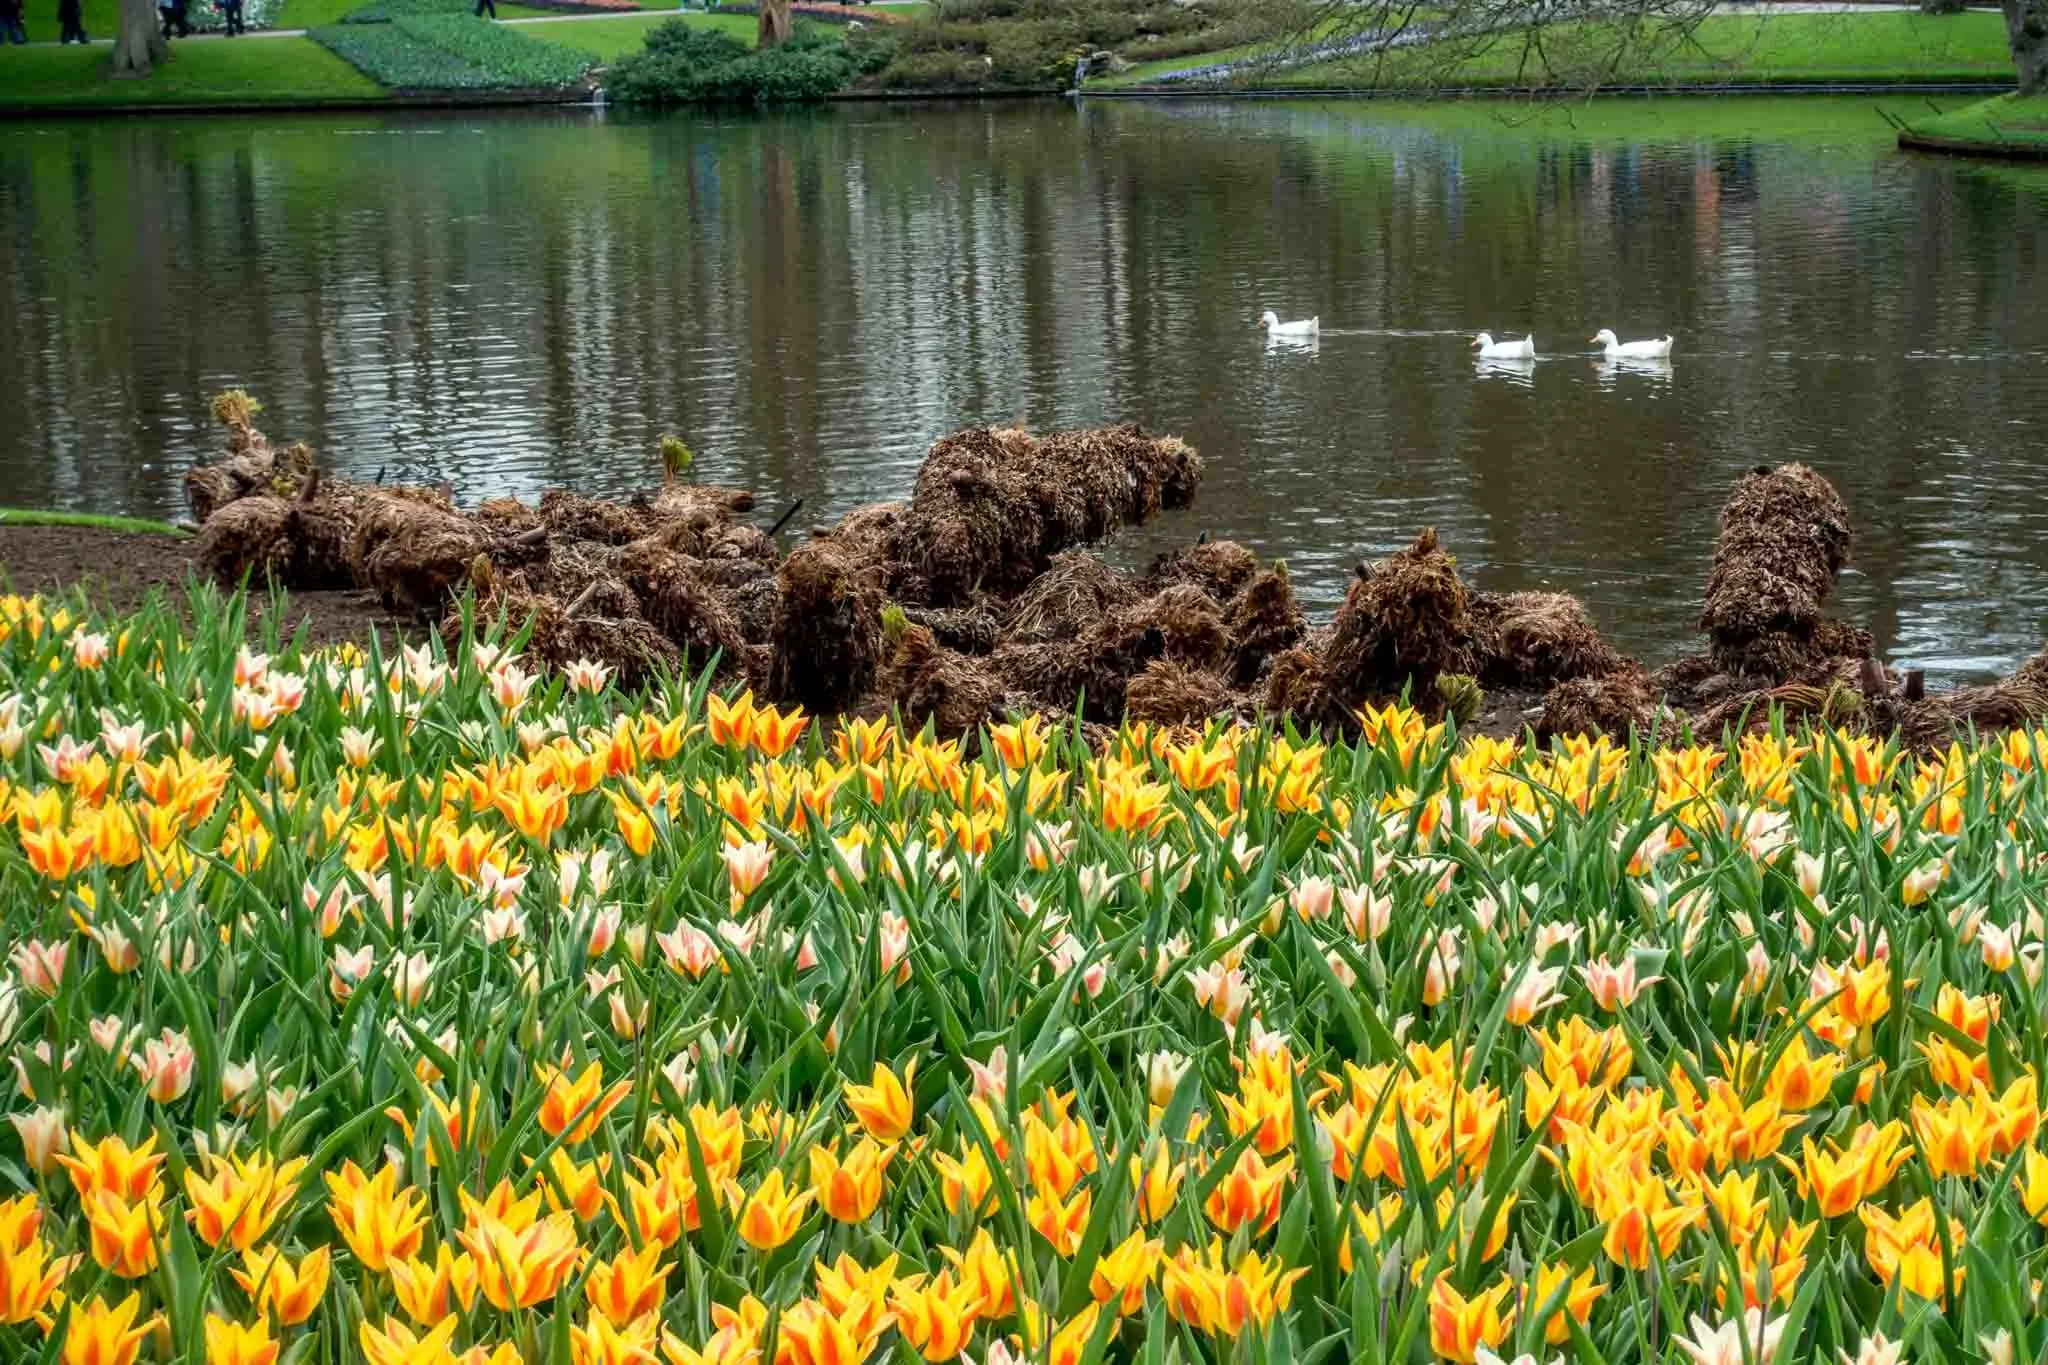 Ducks in a pond surrounded by flowers